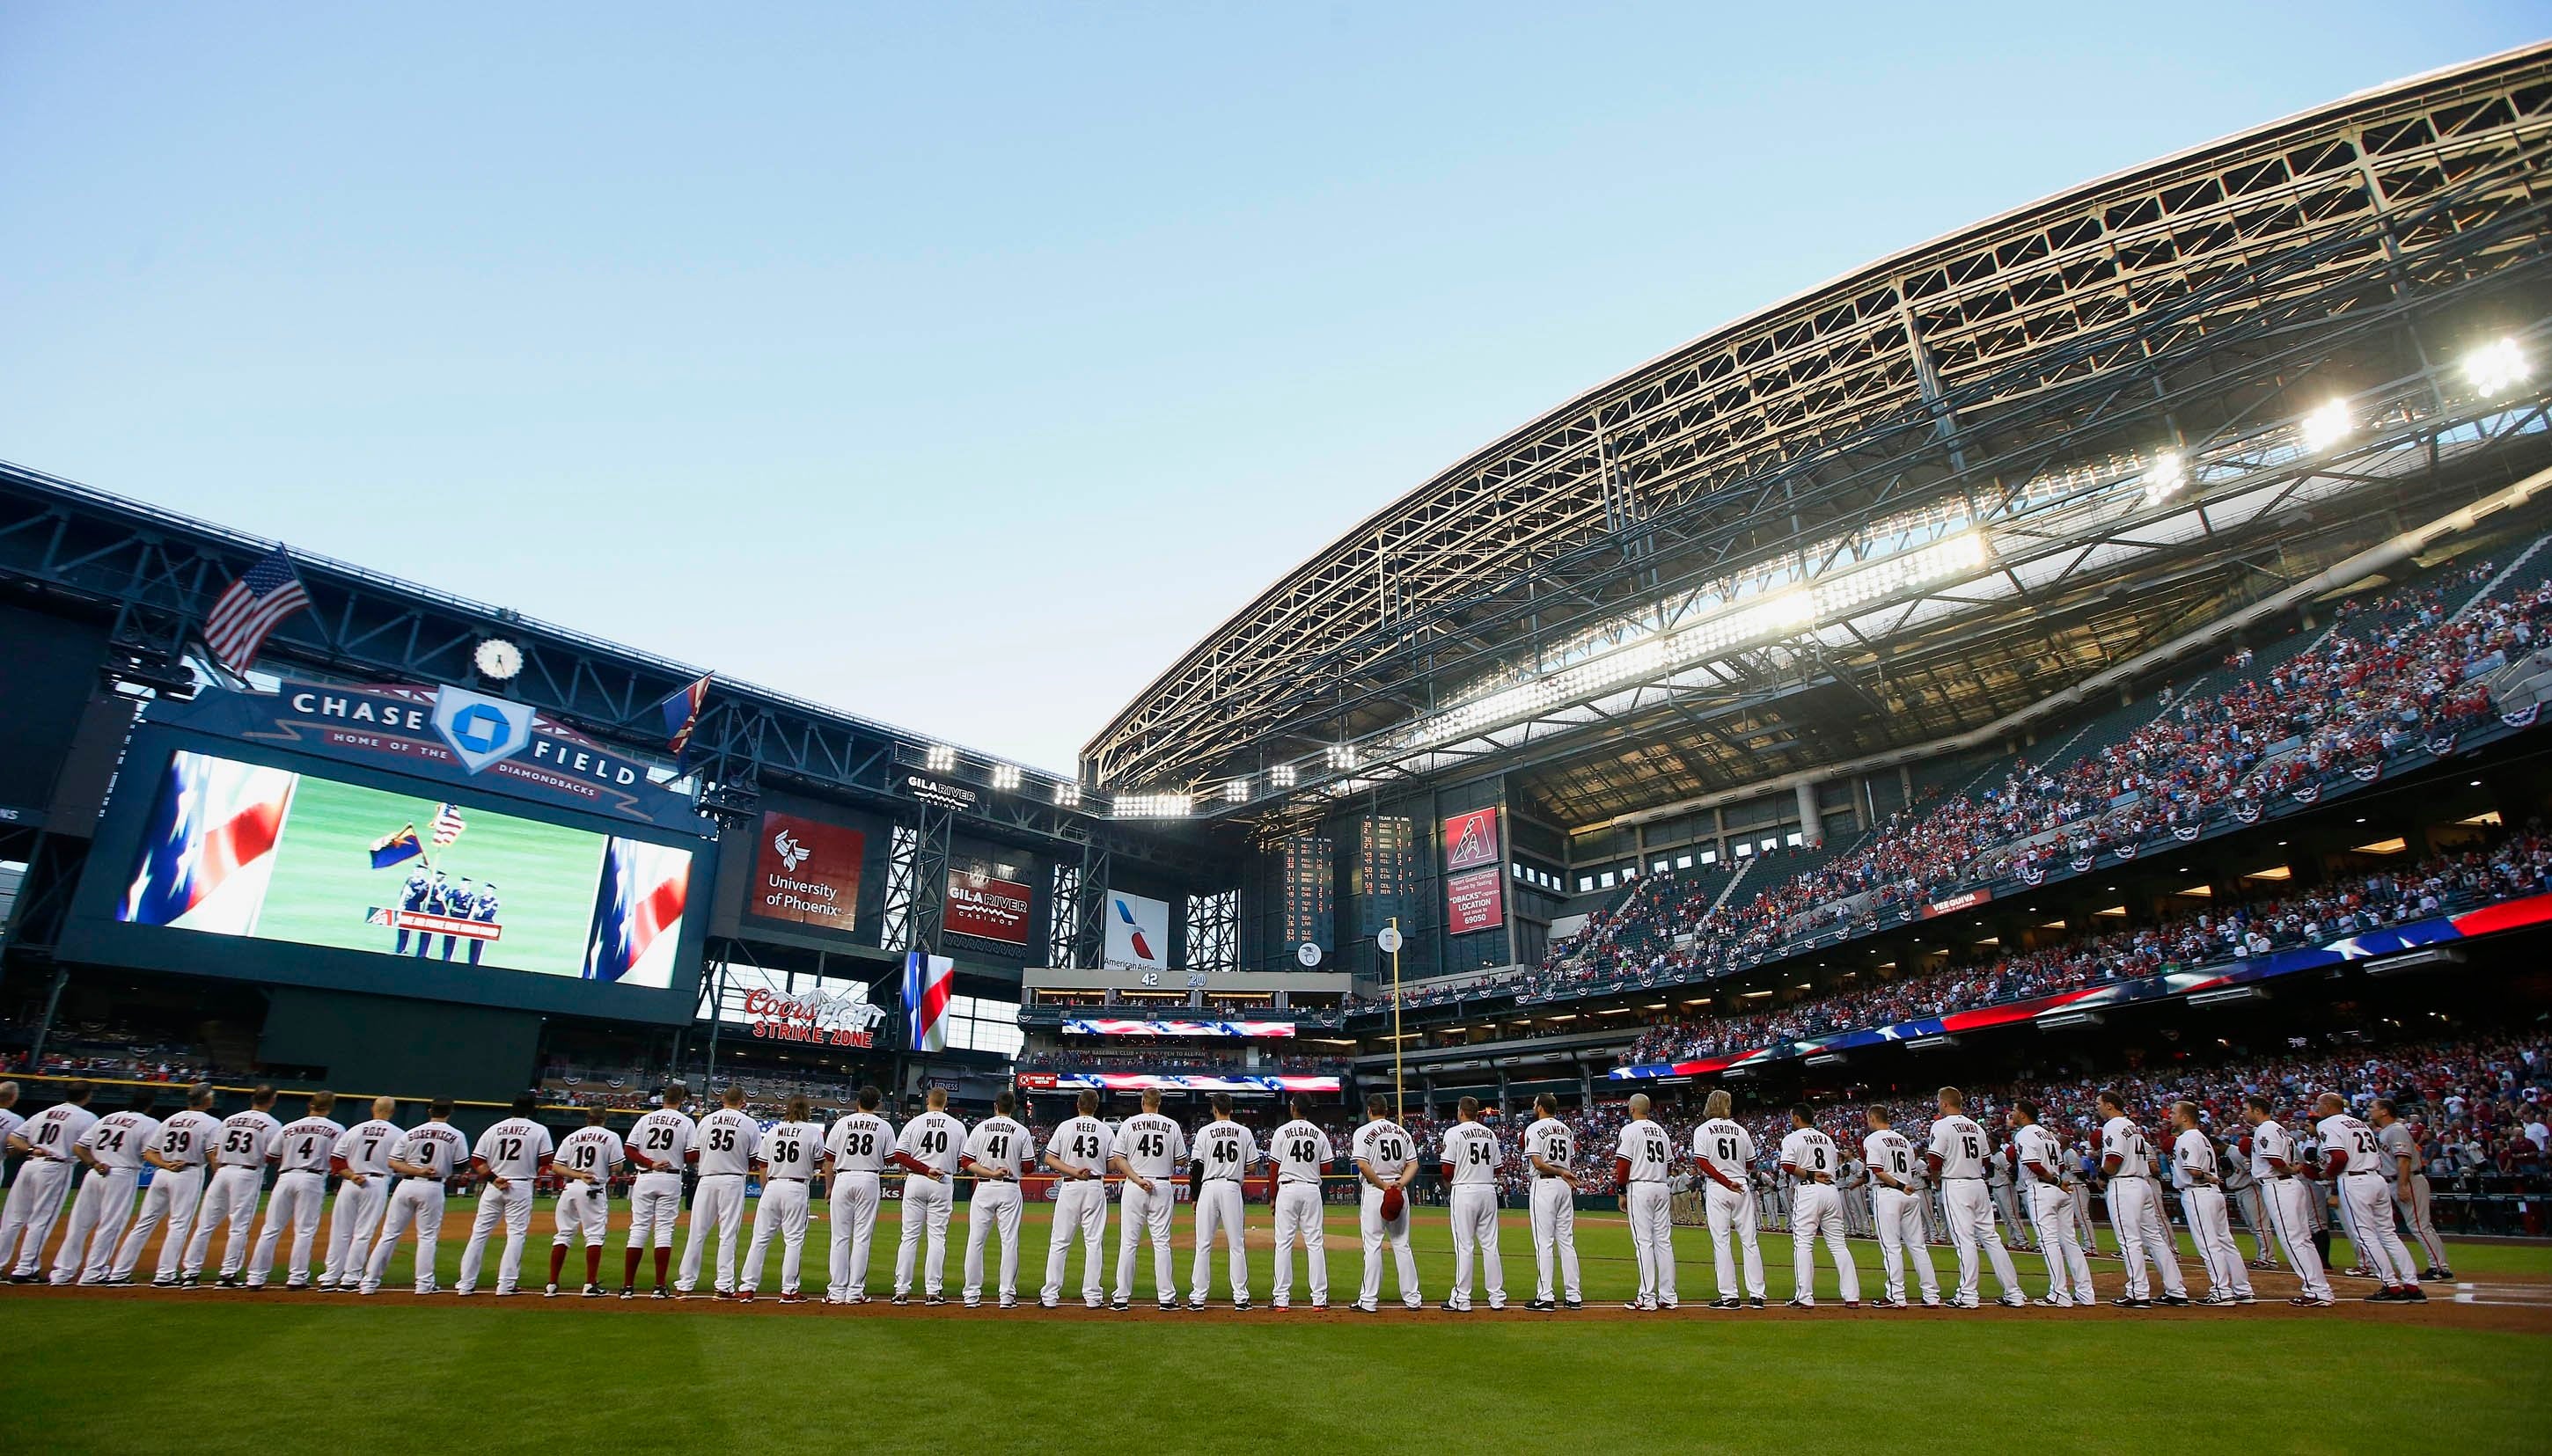 LOOK: These are the uniform designs the Diamondbacks rejected